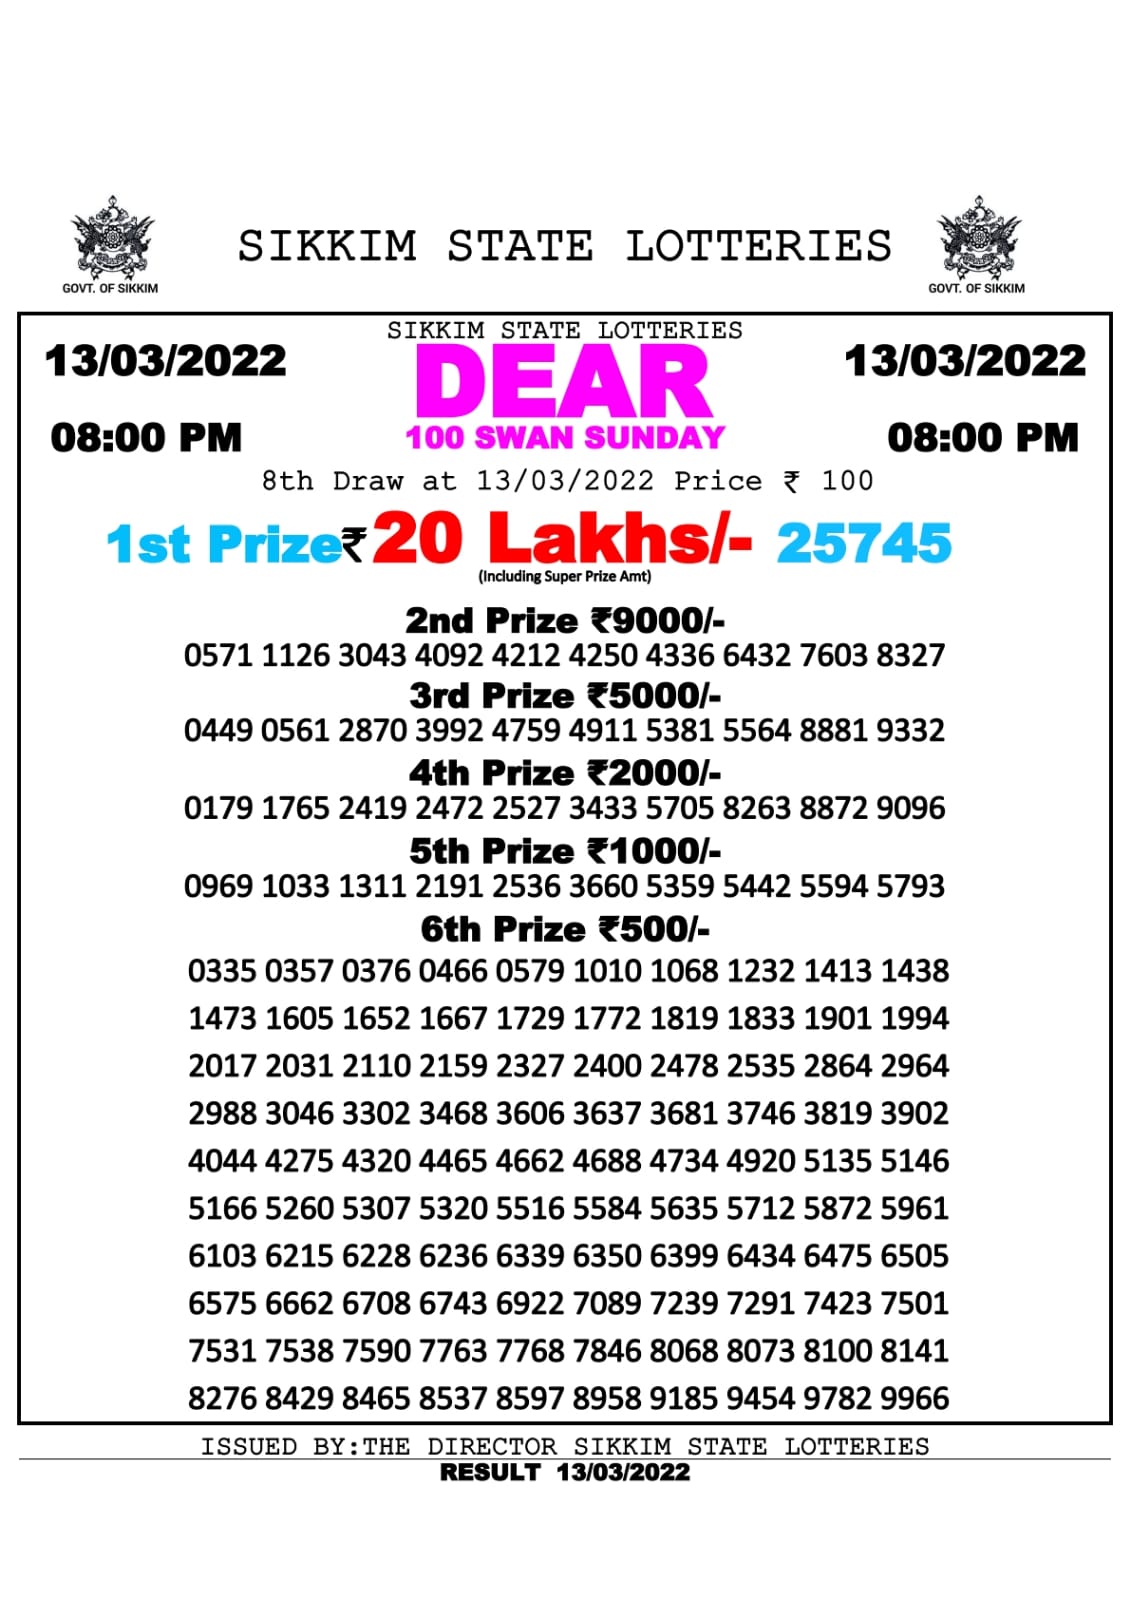 DEAR 100 WEEKLY RESULT 8.00PM 12.03.2022